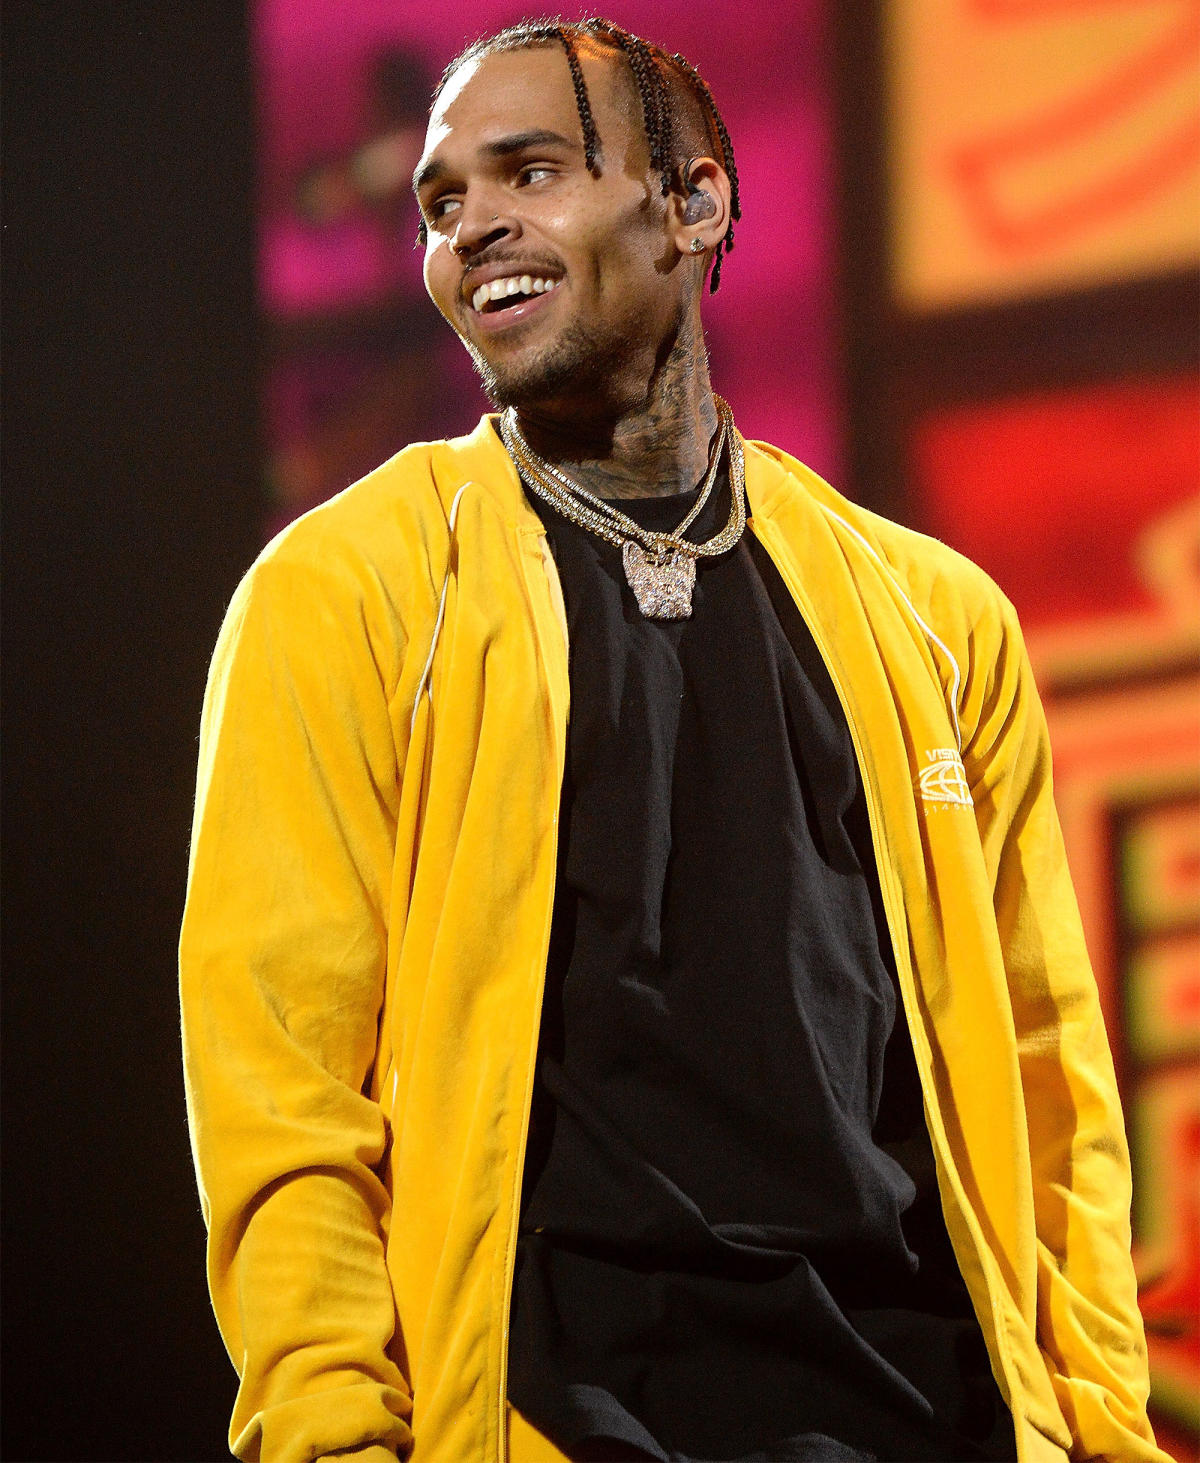 Chris Brown Performs At Jay Zs Tidal Benefit Concert — Seeming To Confirm End Of Feud With 